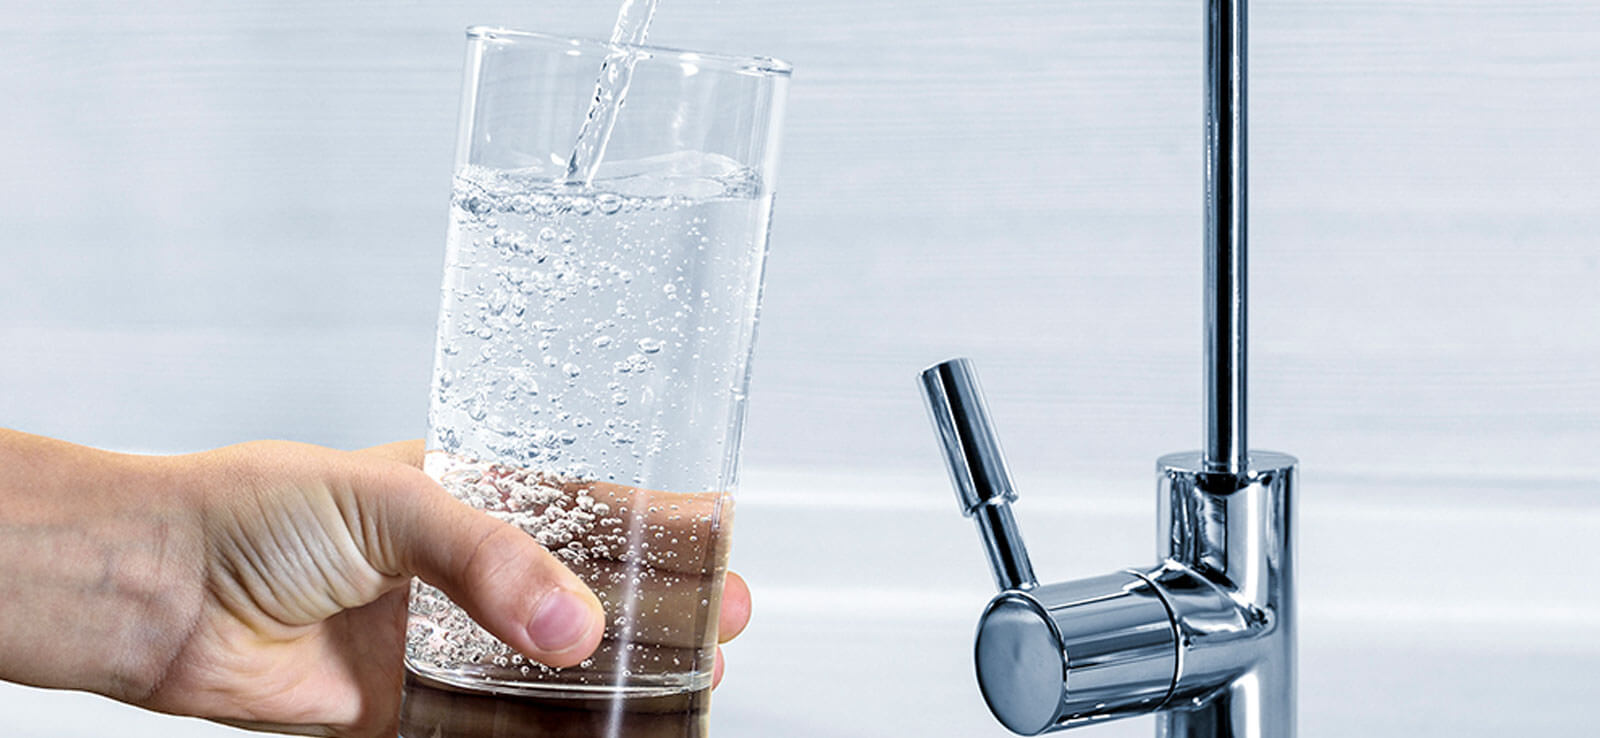 FAQ About Whole Home Water Filtration Systems